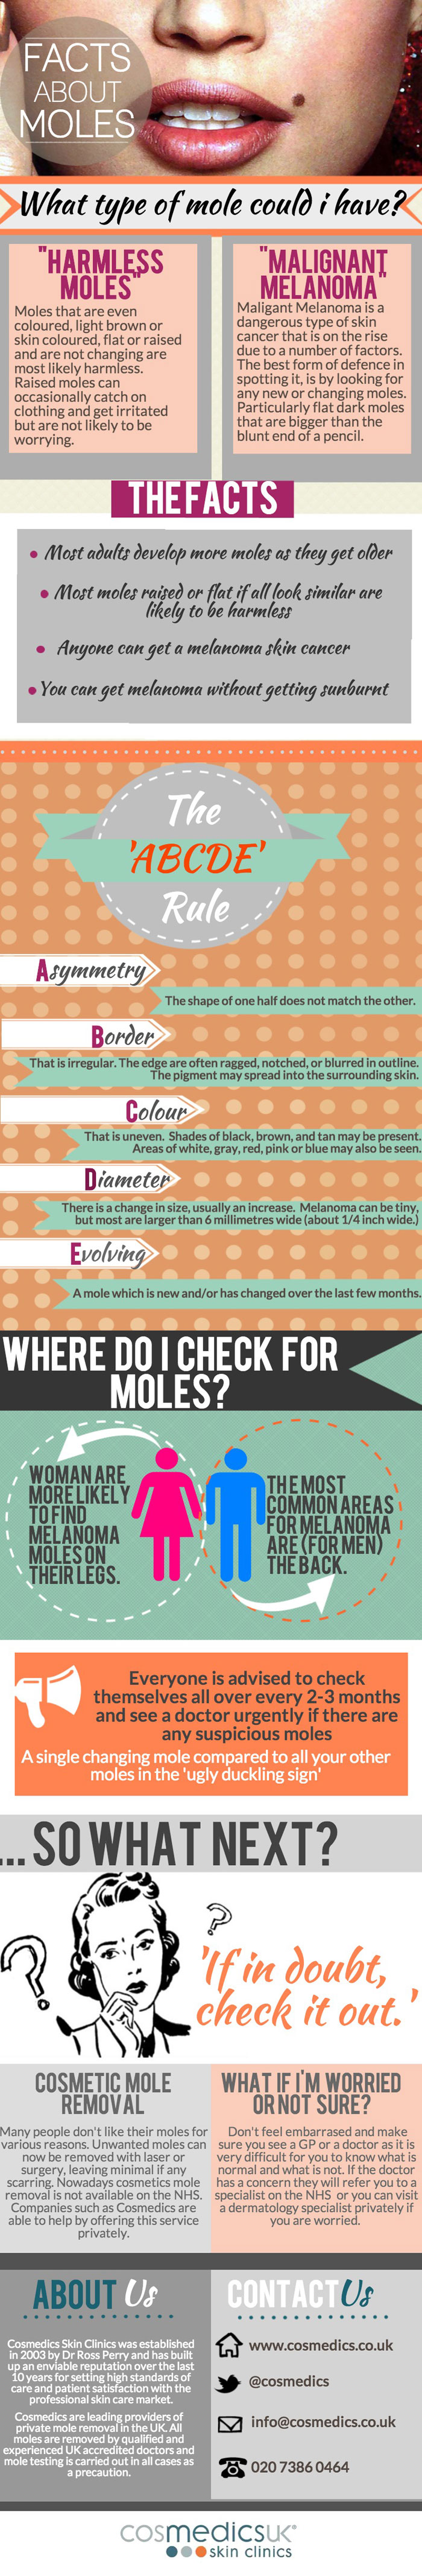 Infographic - facts about moles